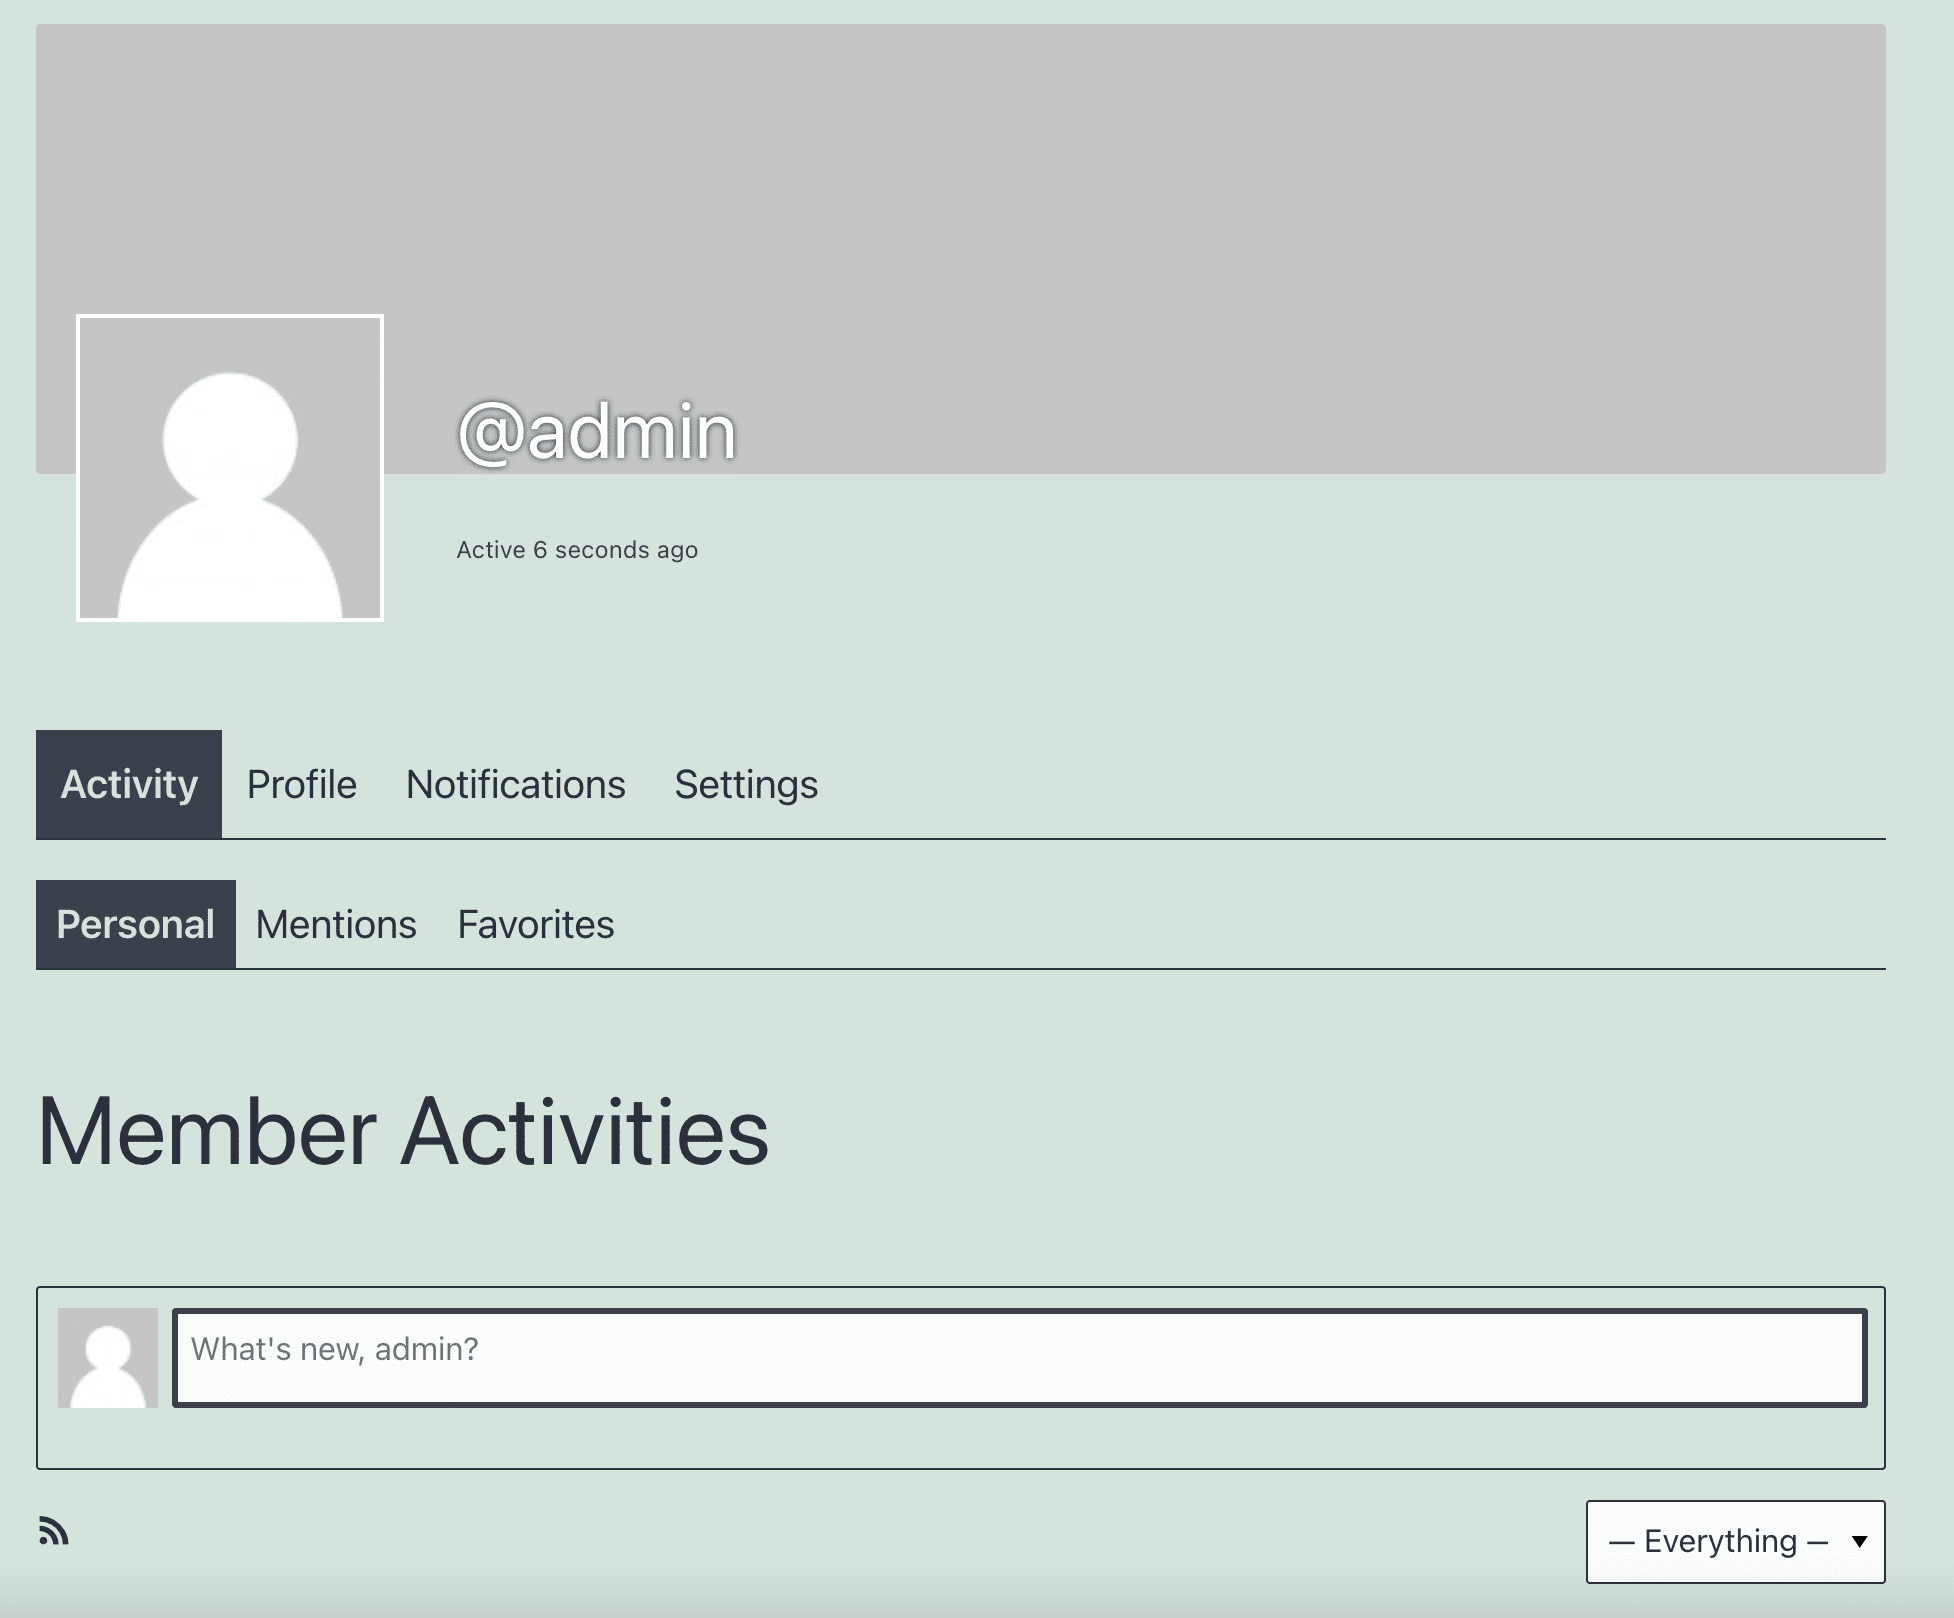 BuddyPress admin page to manage member activities.